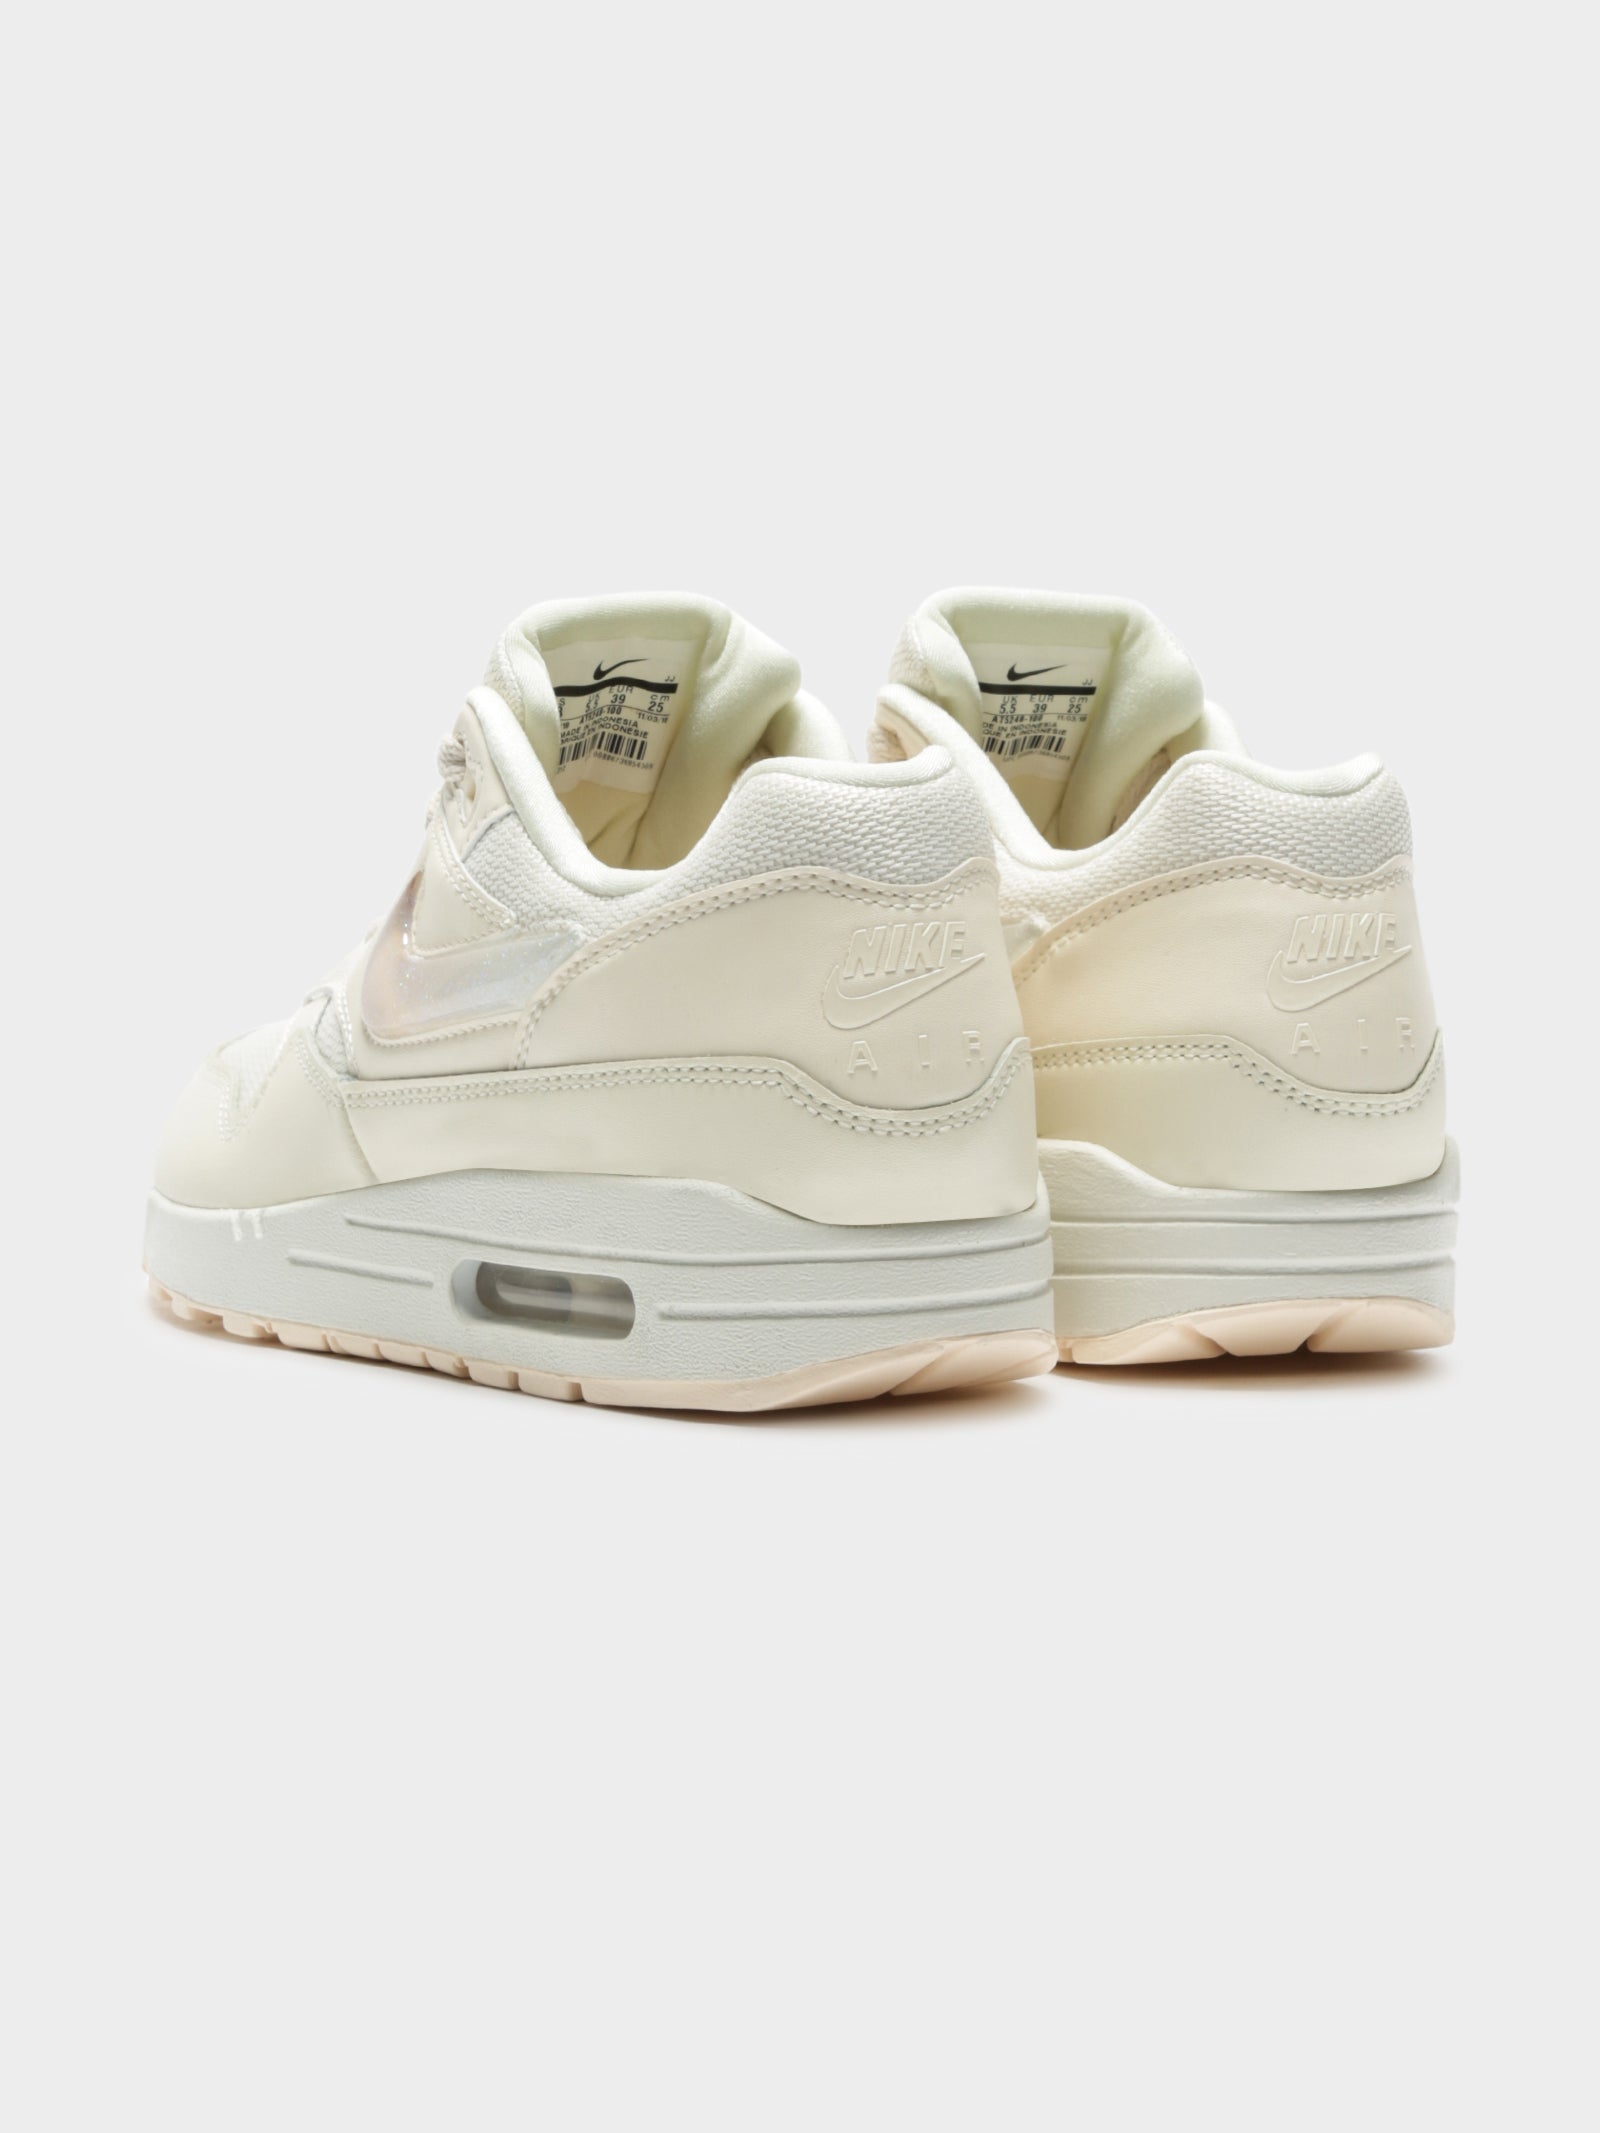 Womens Air Max 1 Jelly Puff in Pale Ivory Guava Ice & Summit White